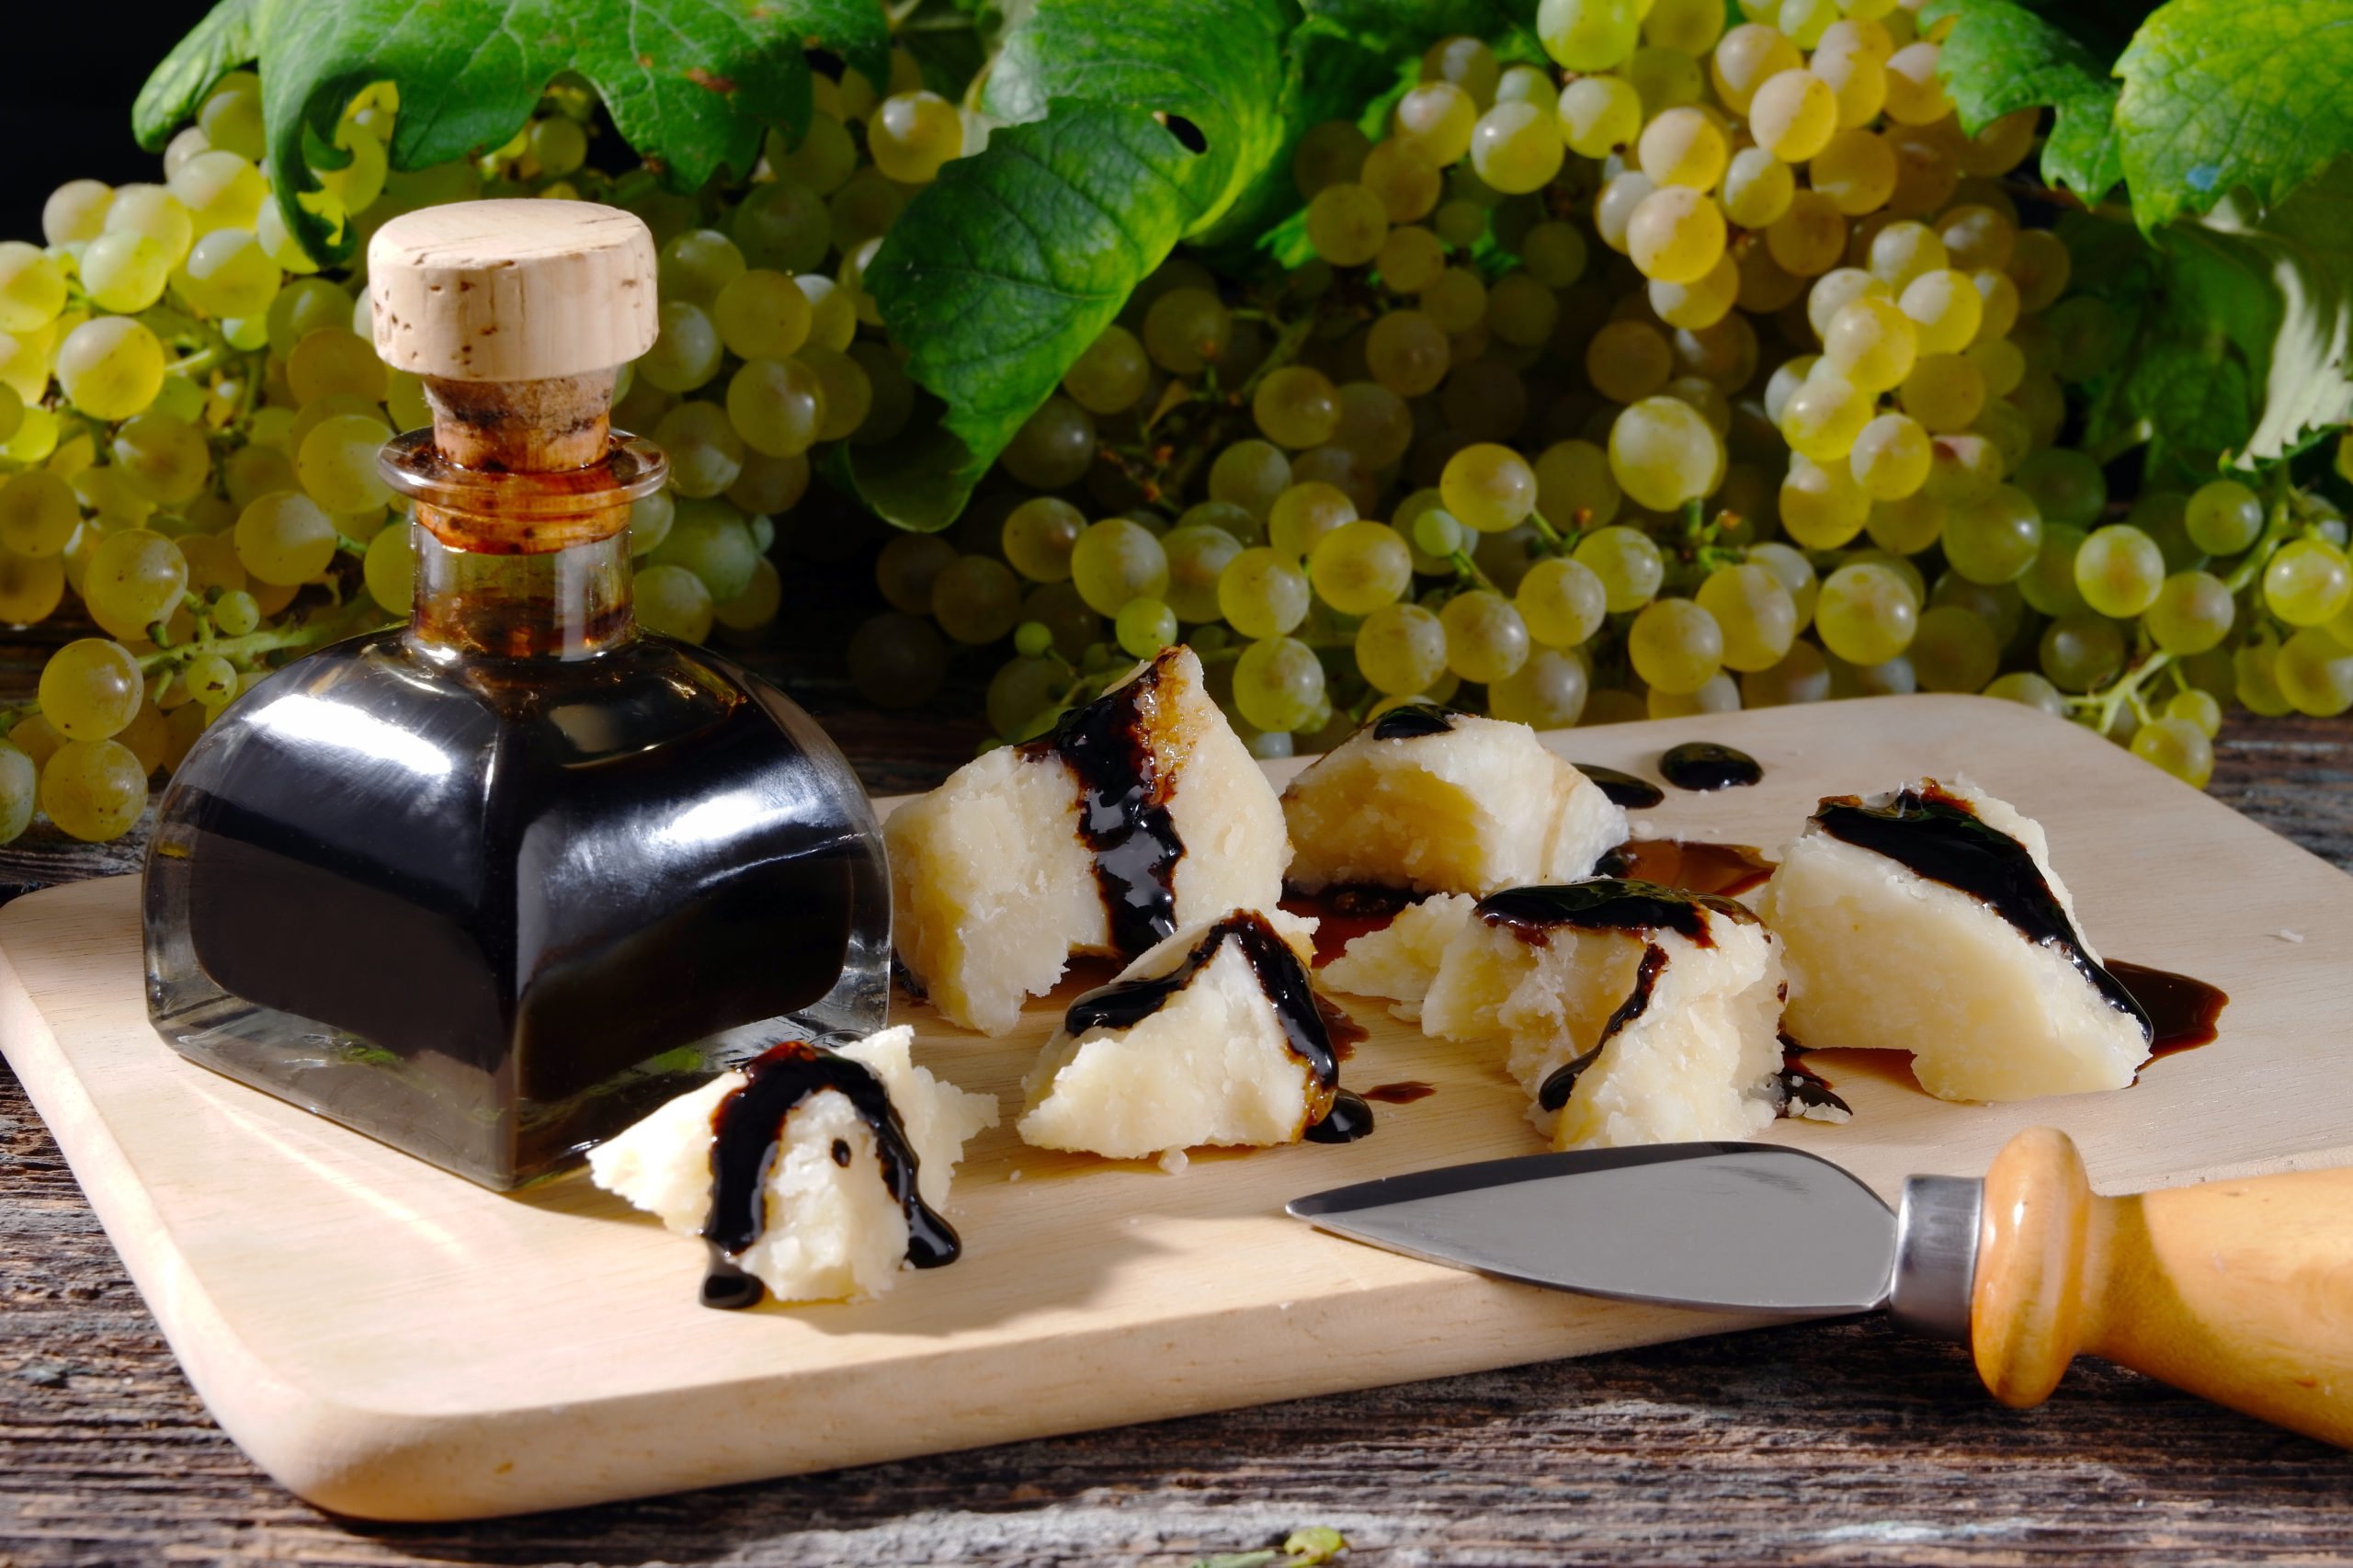 Taste Some Delicious Local Products On The Balsamic Vinegar 'aceto' Tasting From Modena